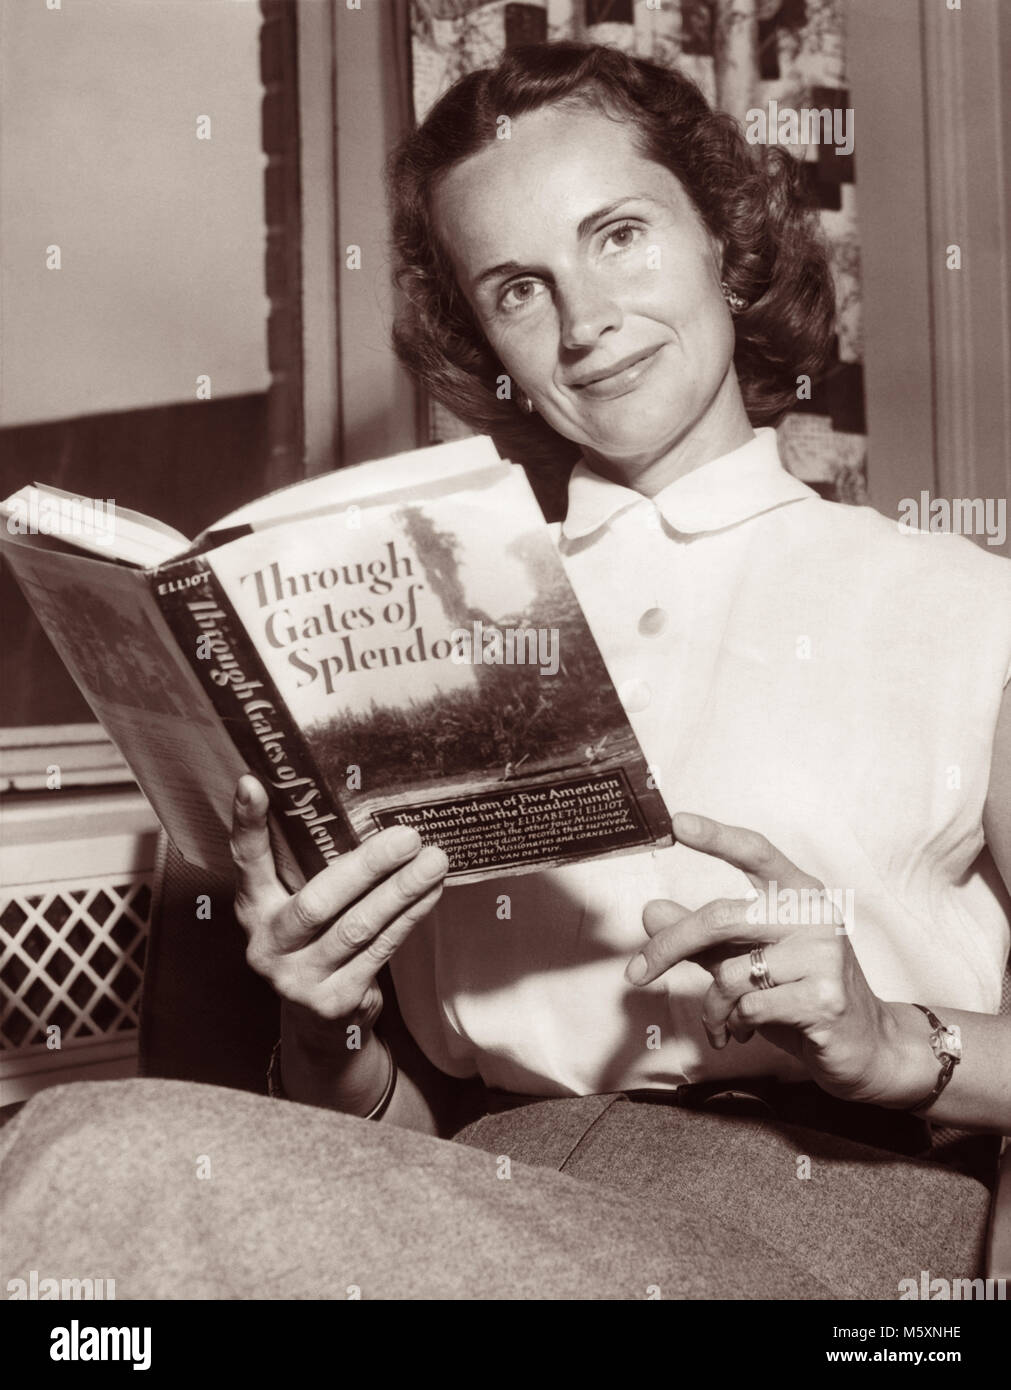 Ruth Bell Graham (1920-2007), wife of American evangelist Billy Graham, reading missionary Elisabeth Elliot's book Through Gates of Splendor in 1957 during visit to New York City for Billy Graham's crusade at Madison Square Gardens. Stock Photo